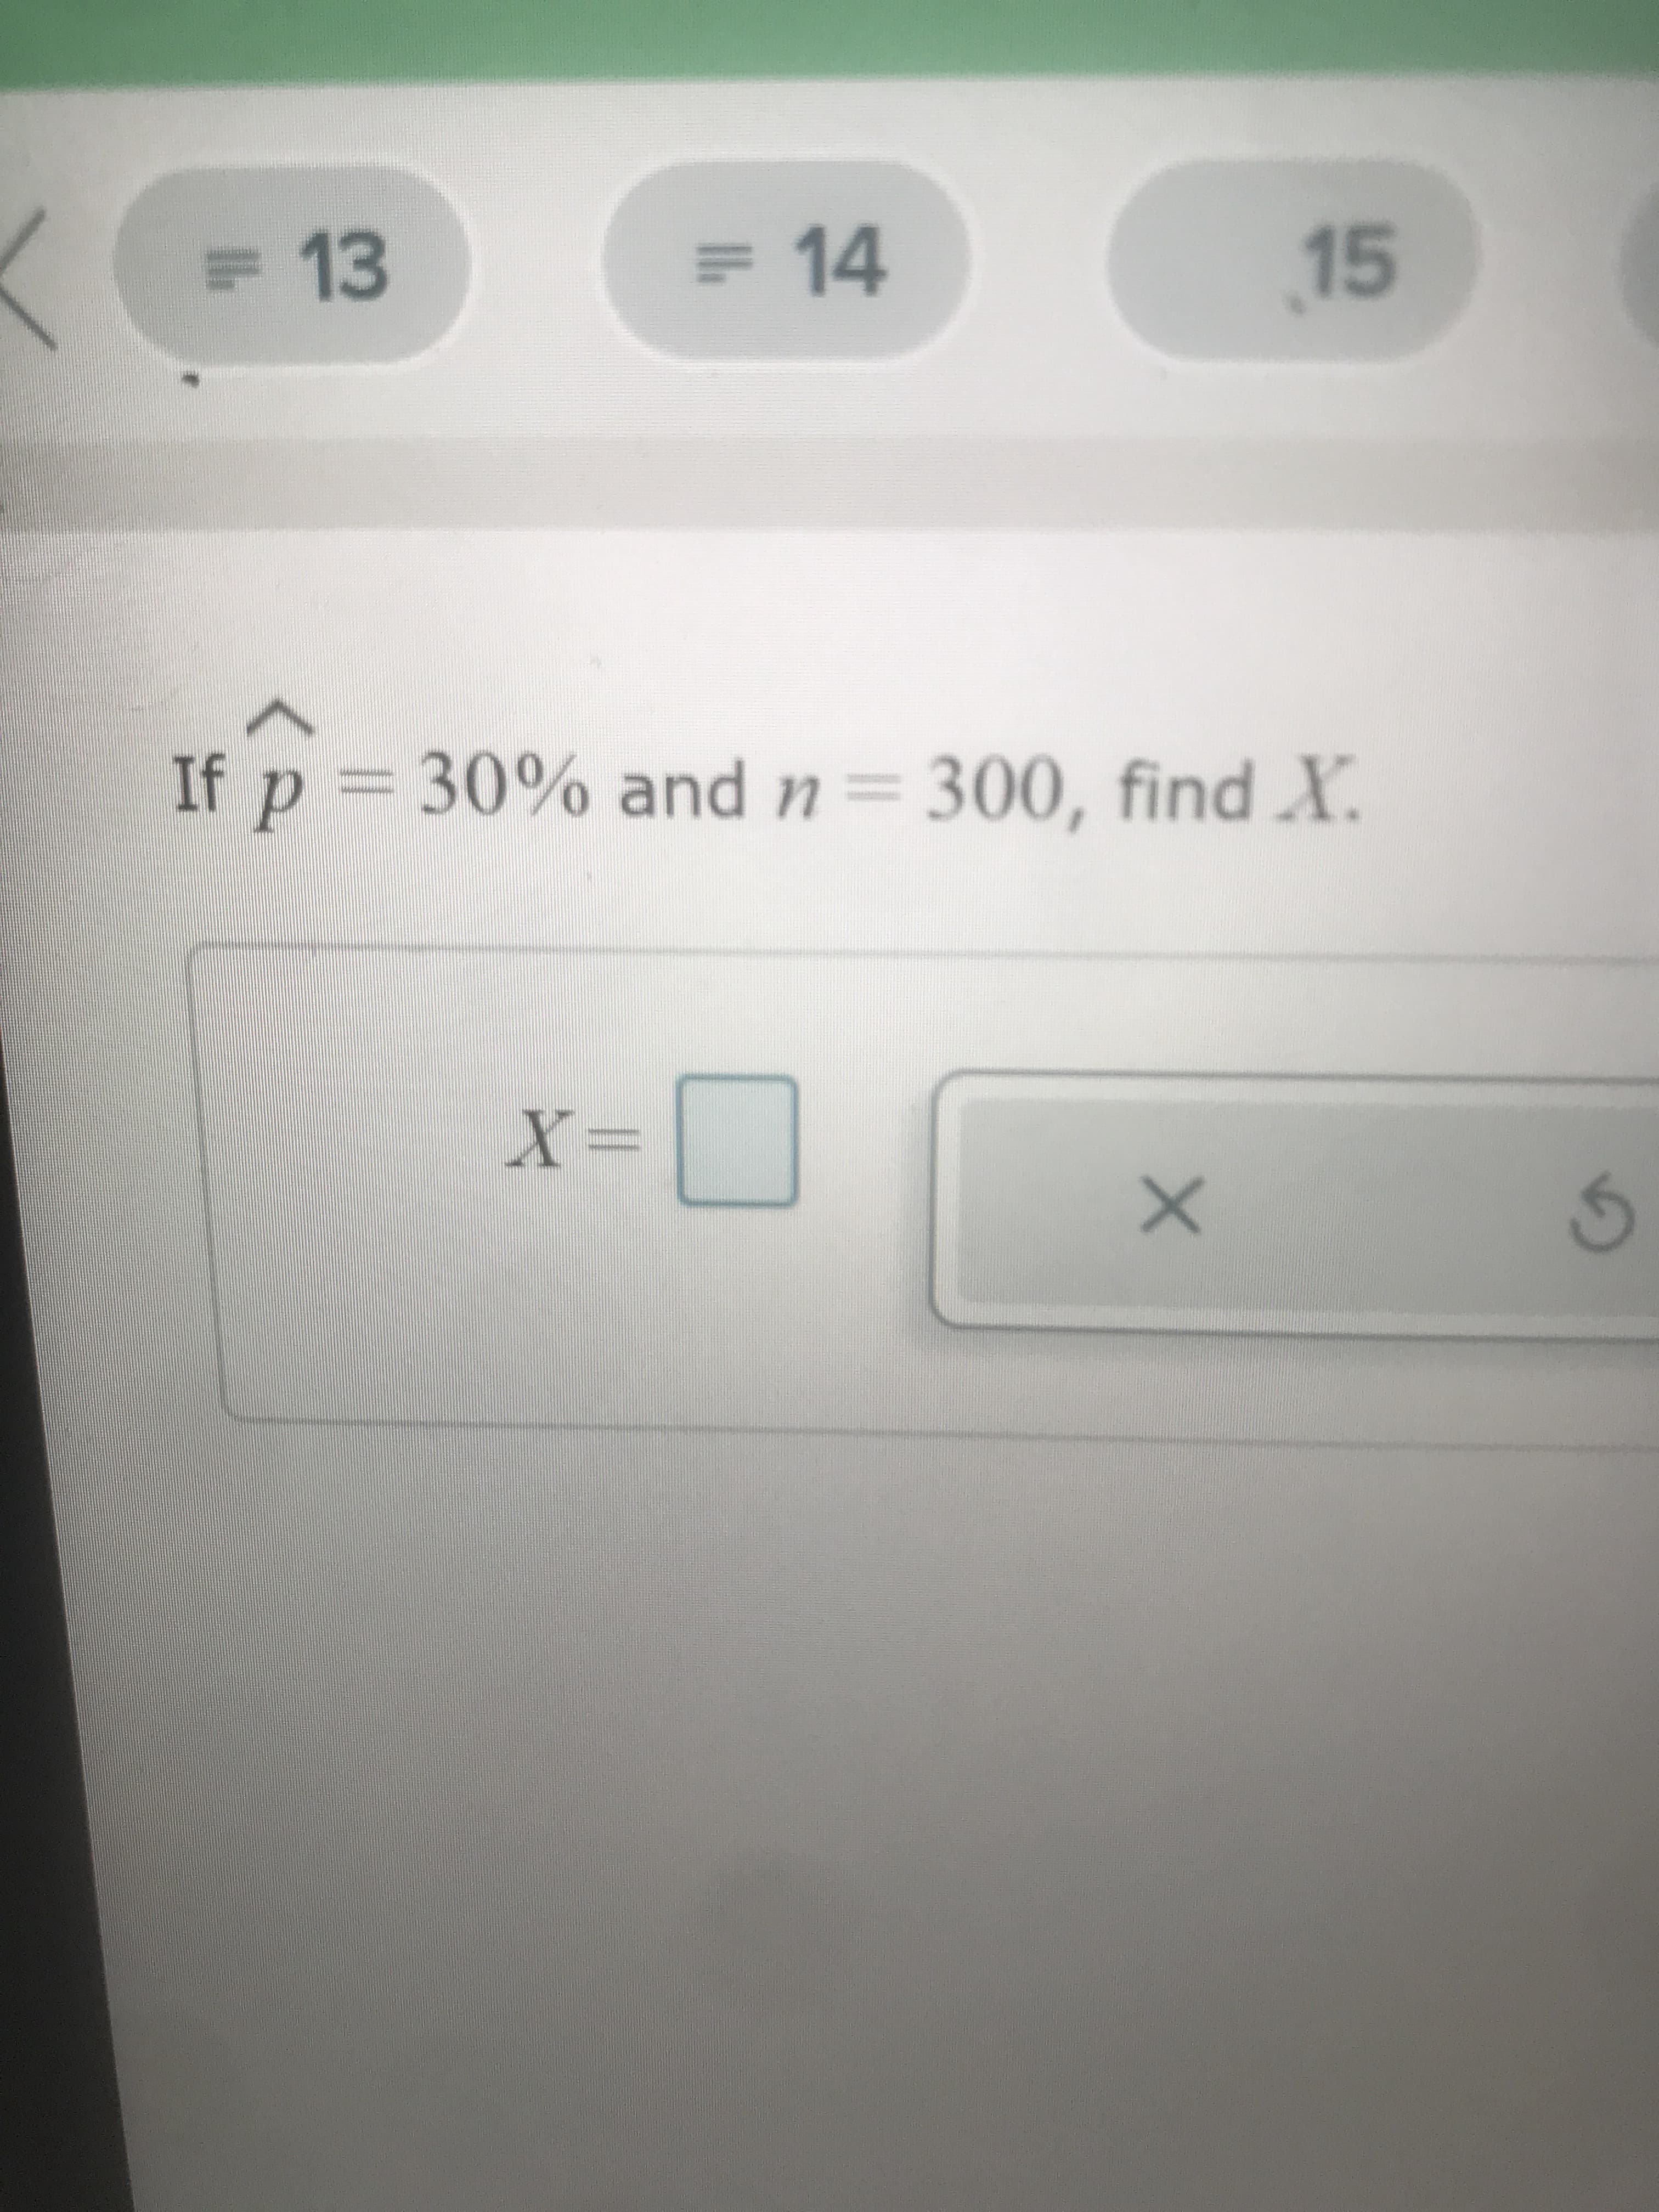 If p = 30% and n= 300, find X.
